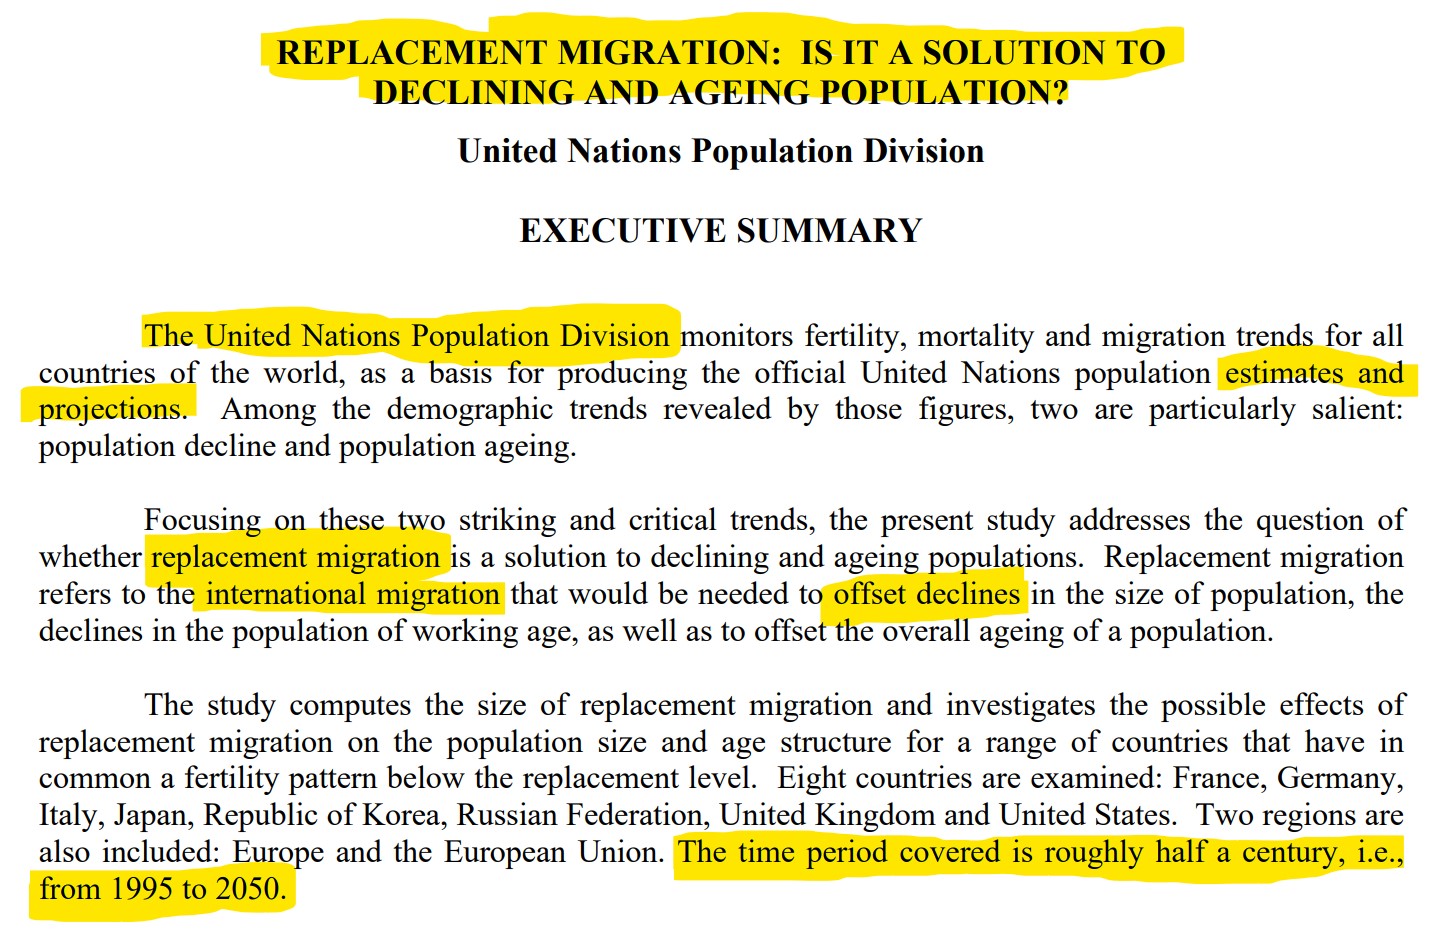 Replacement migration: is it a solution to declining and ageing populations?<br /><br />2000<br /><br />https://digitallibrary.un.org/record/412547<br /><br />https://filedn.com/lAbnr520WC4VIqzcB0lFhLB/documents/en/unpd-egm_200010_un_2001_replacementmigration.pdf